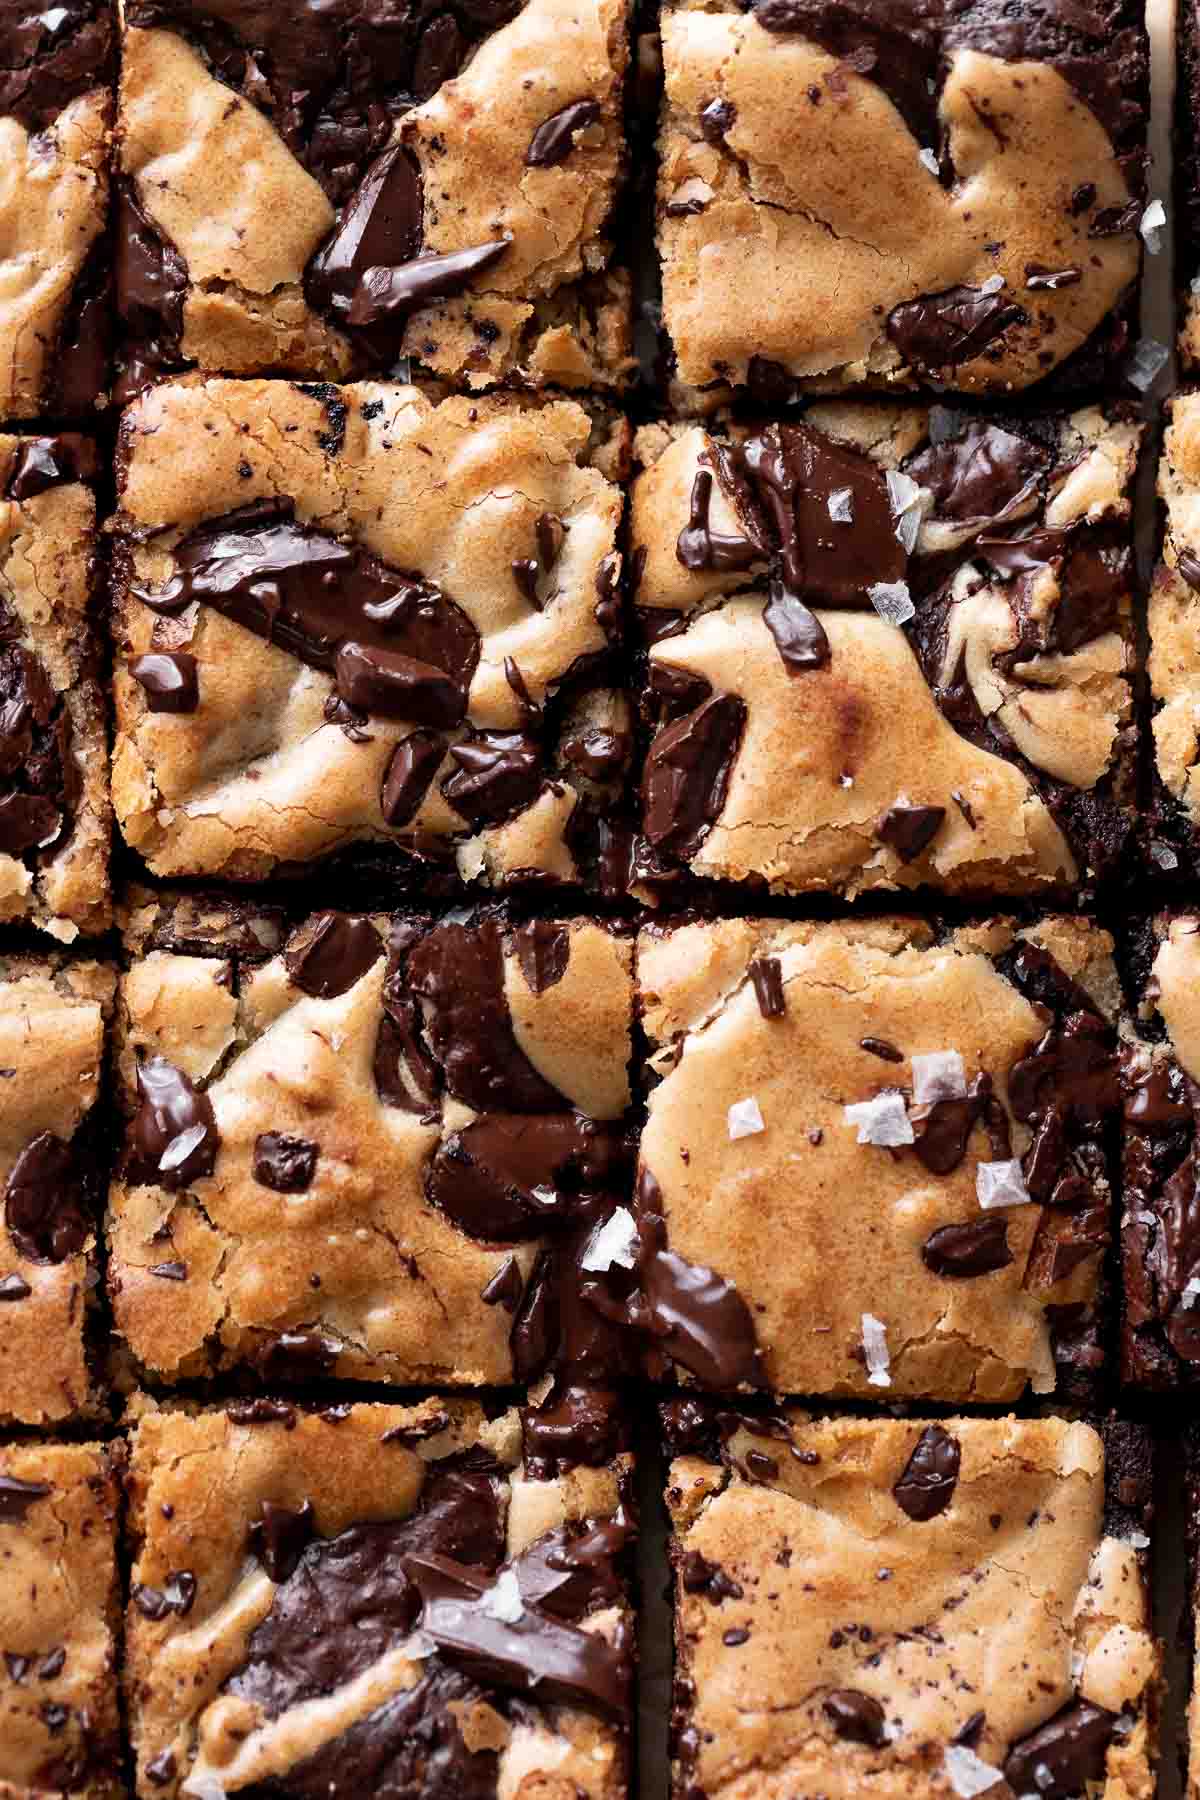 a close up of the tops of the blondie brownies showing the melted chocolate.